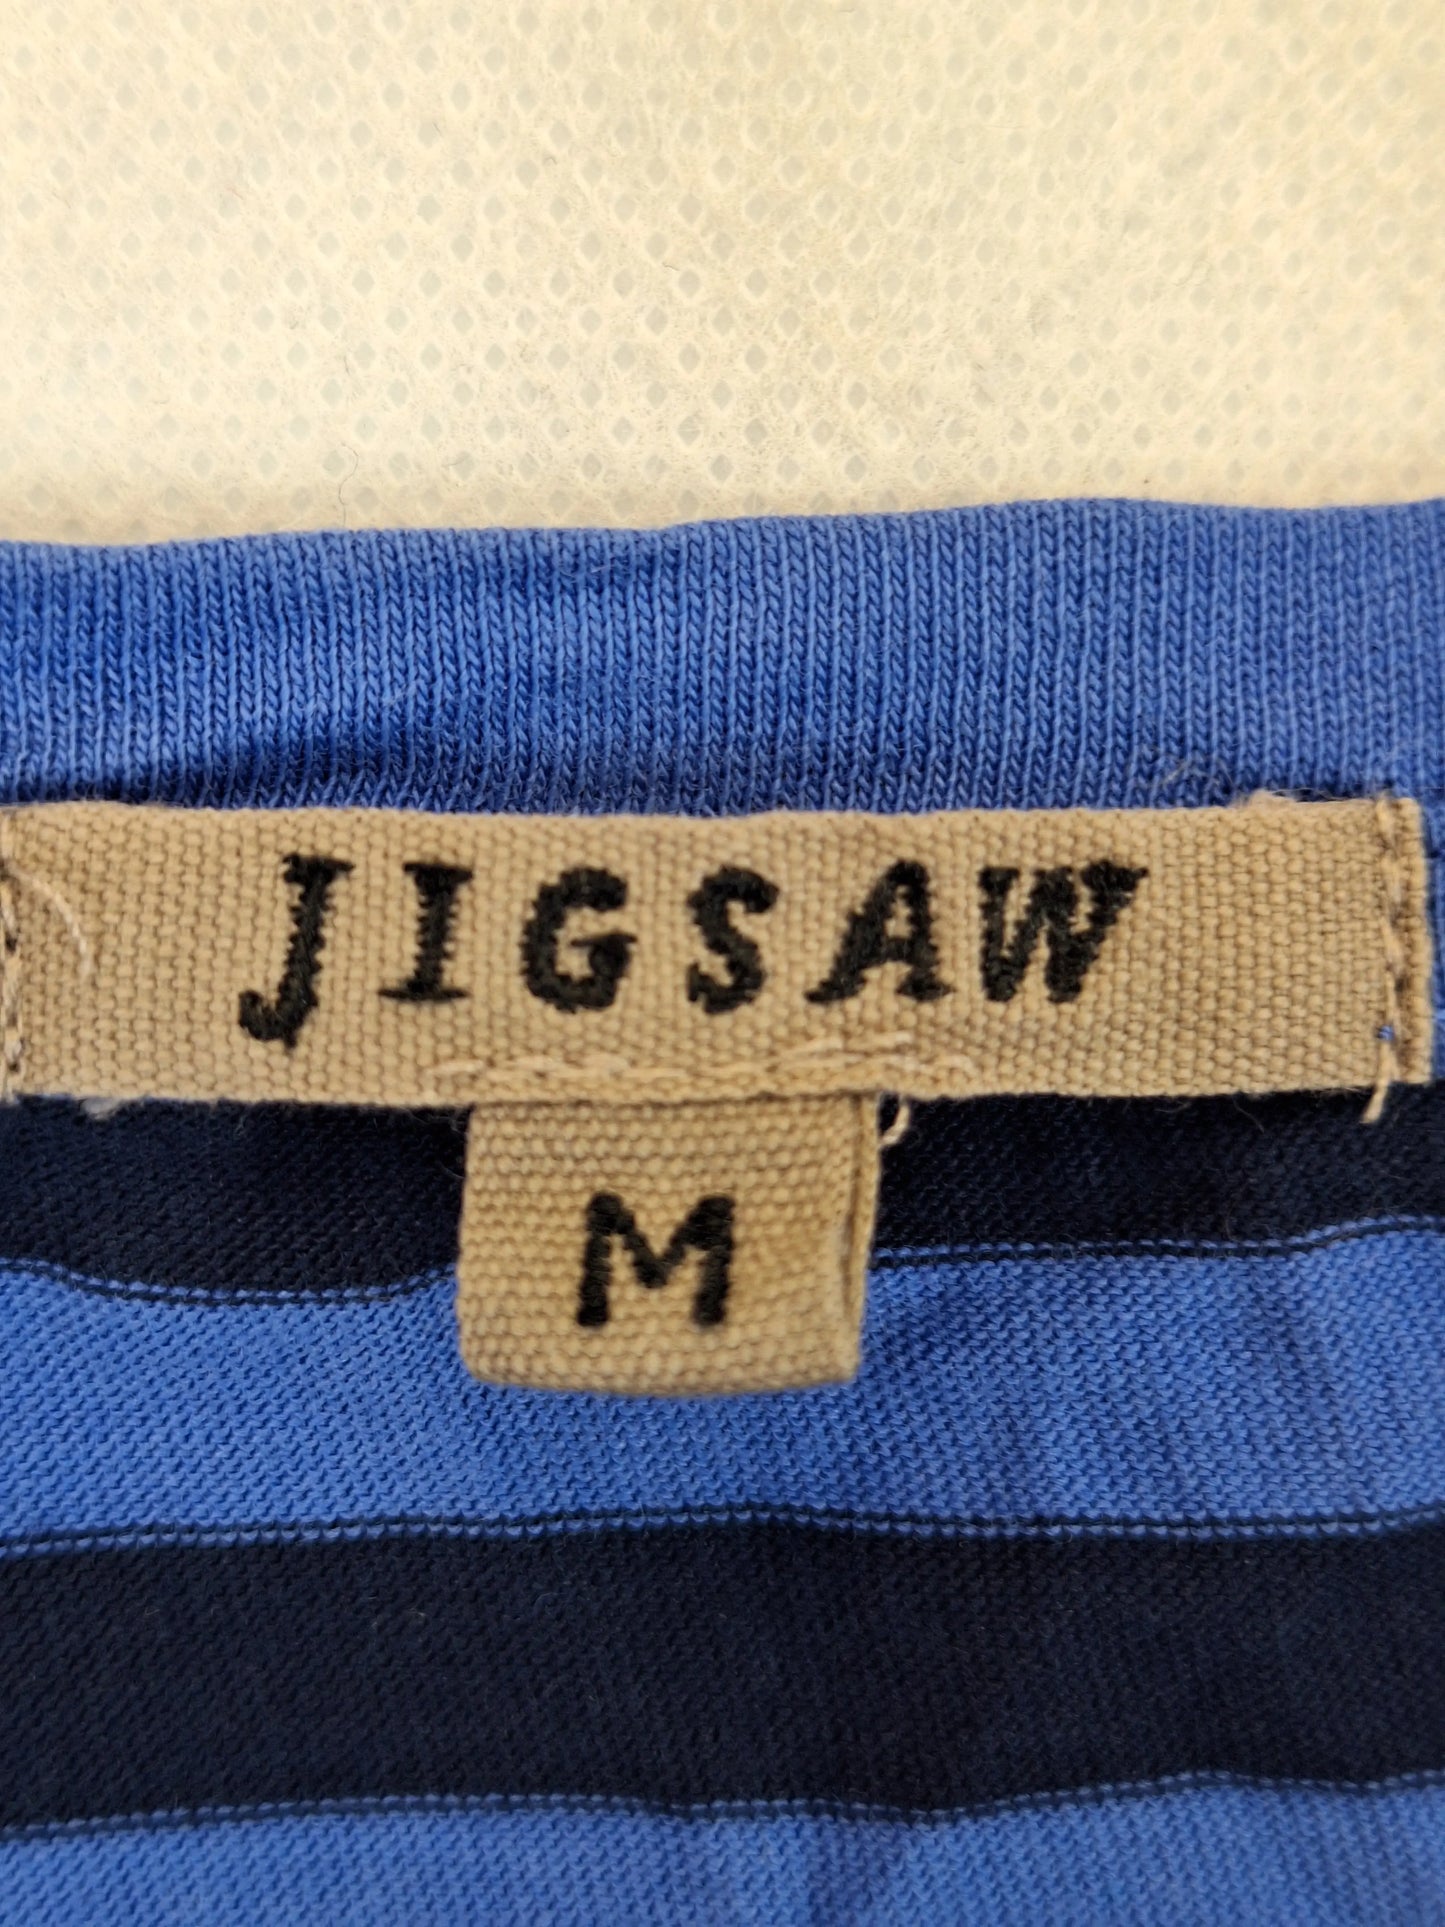 Jigsaw Multi Coloured Striped  T-shirt Size M by SwapUp-Online Second Hand Store-Online Thrift Store